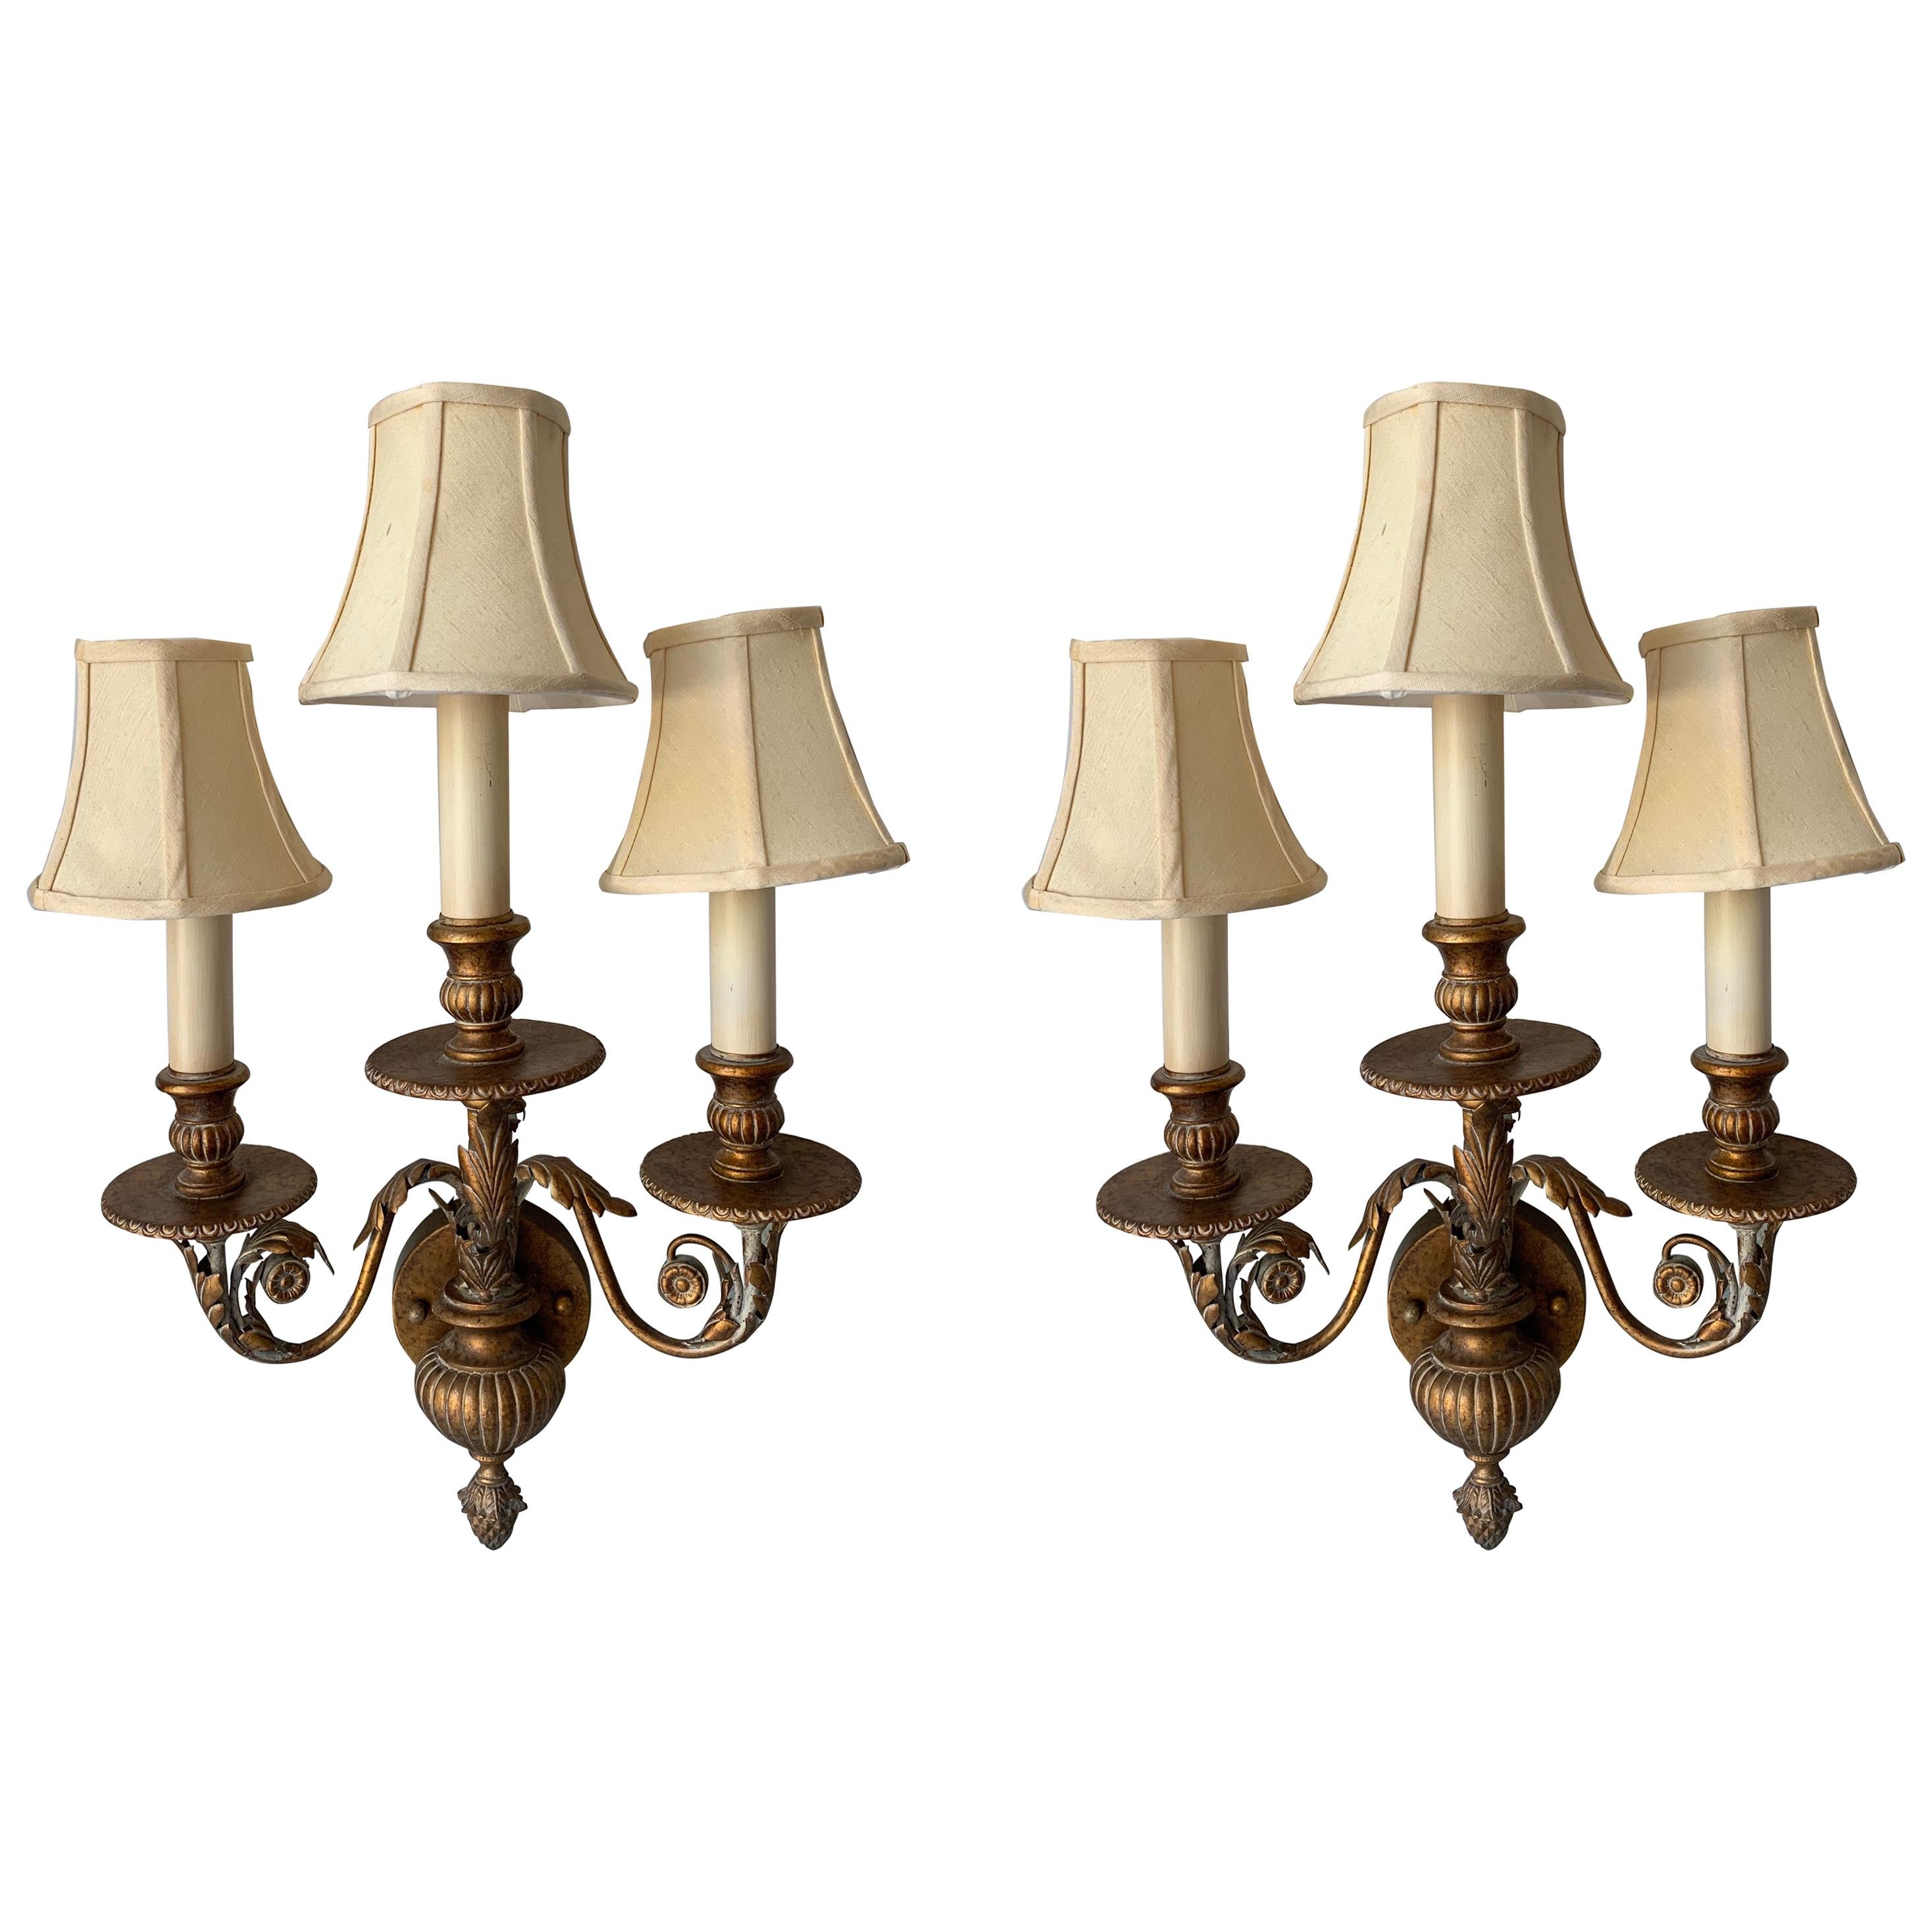 Traditional 3-Arm Brass Sconces & Shades by the Fine Arts Company, a Pair